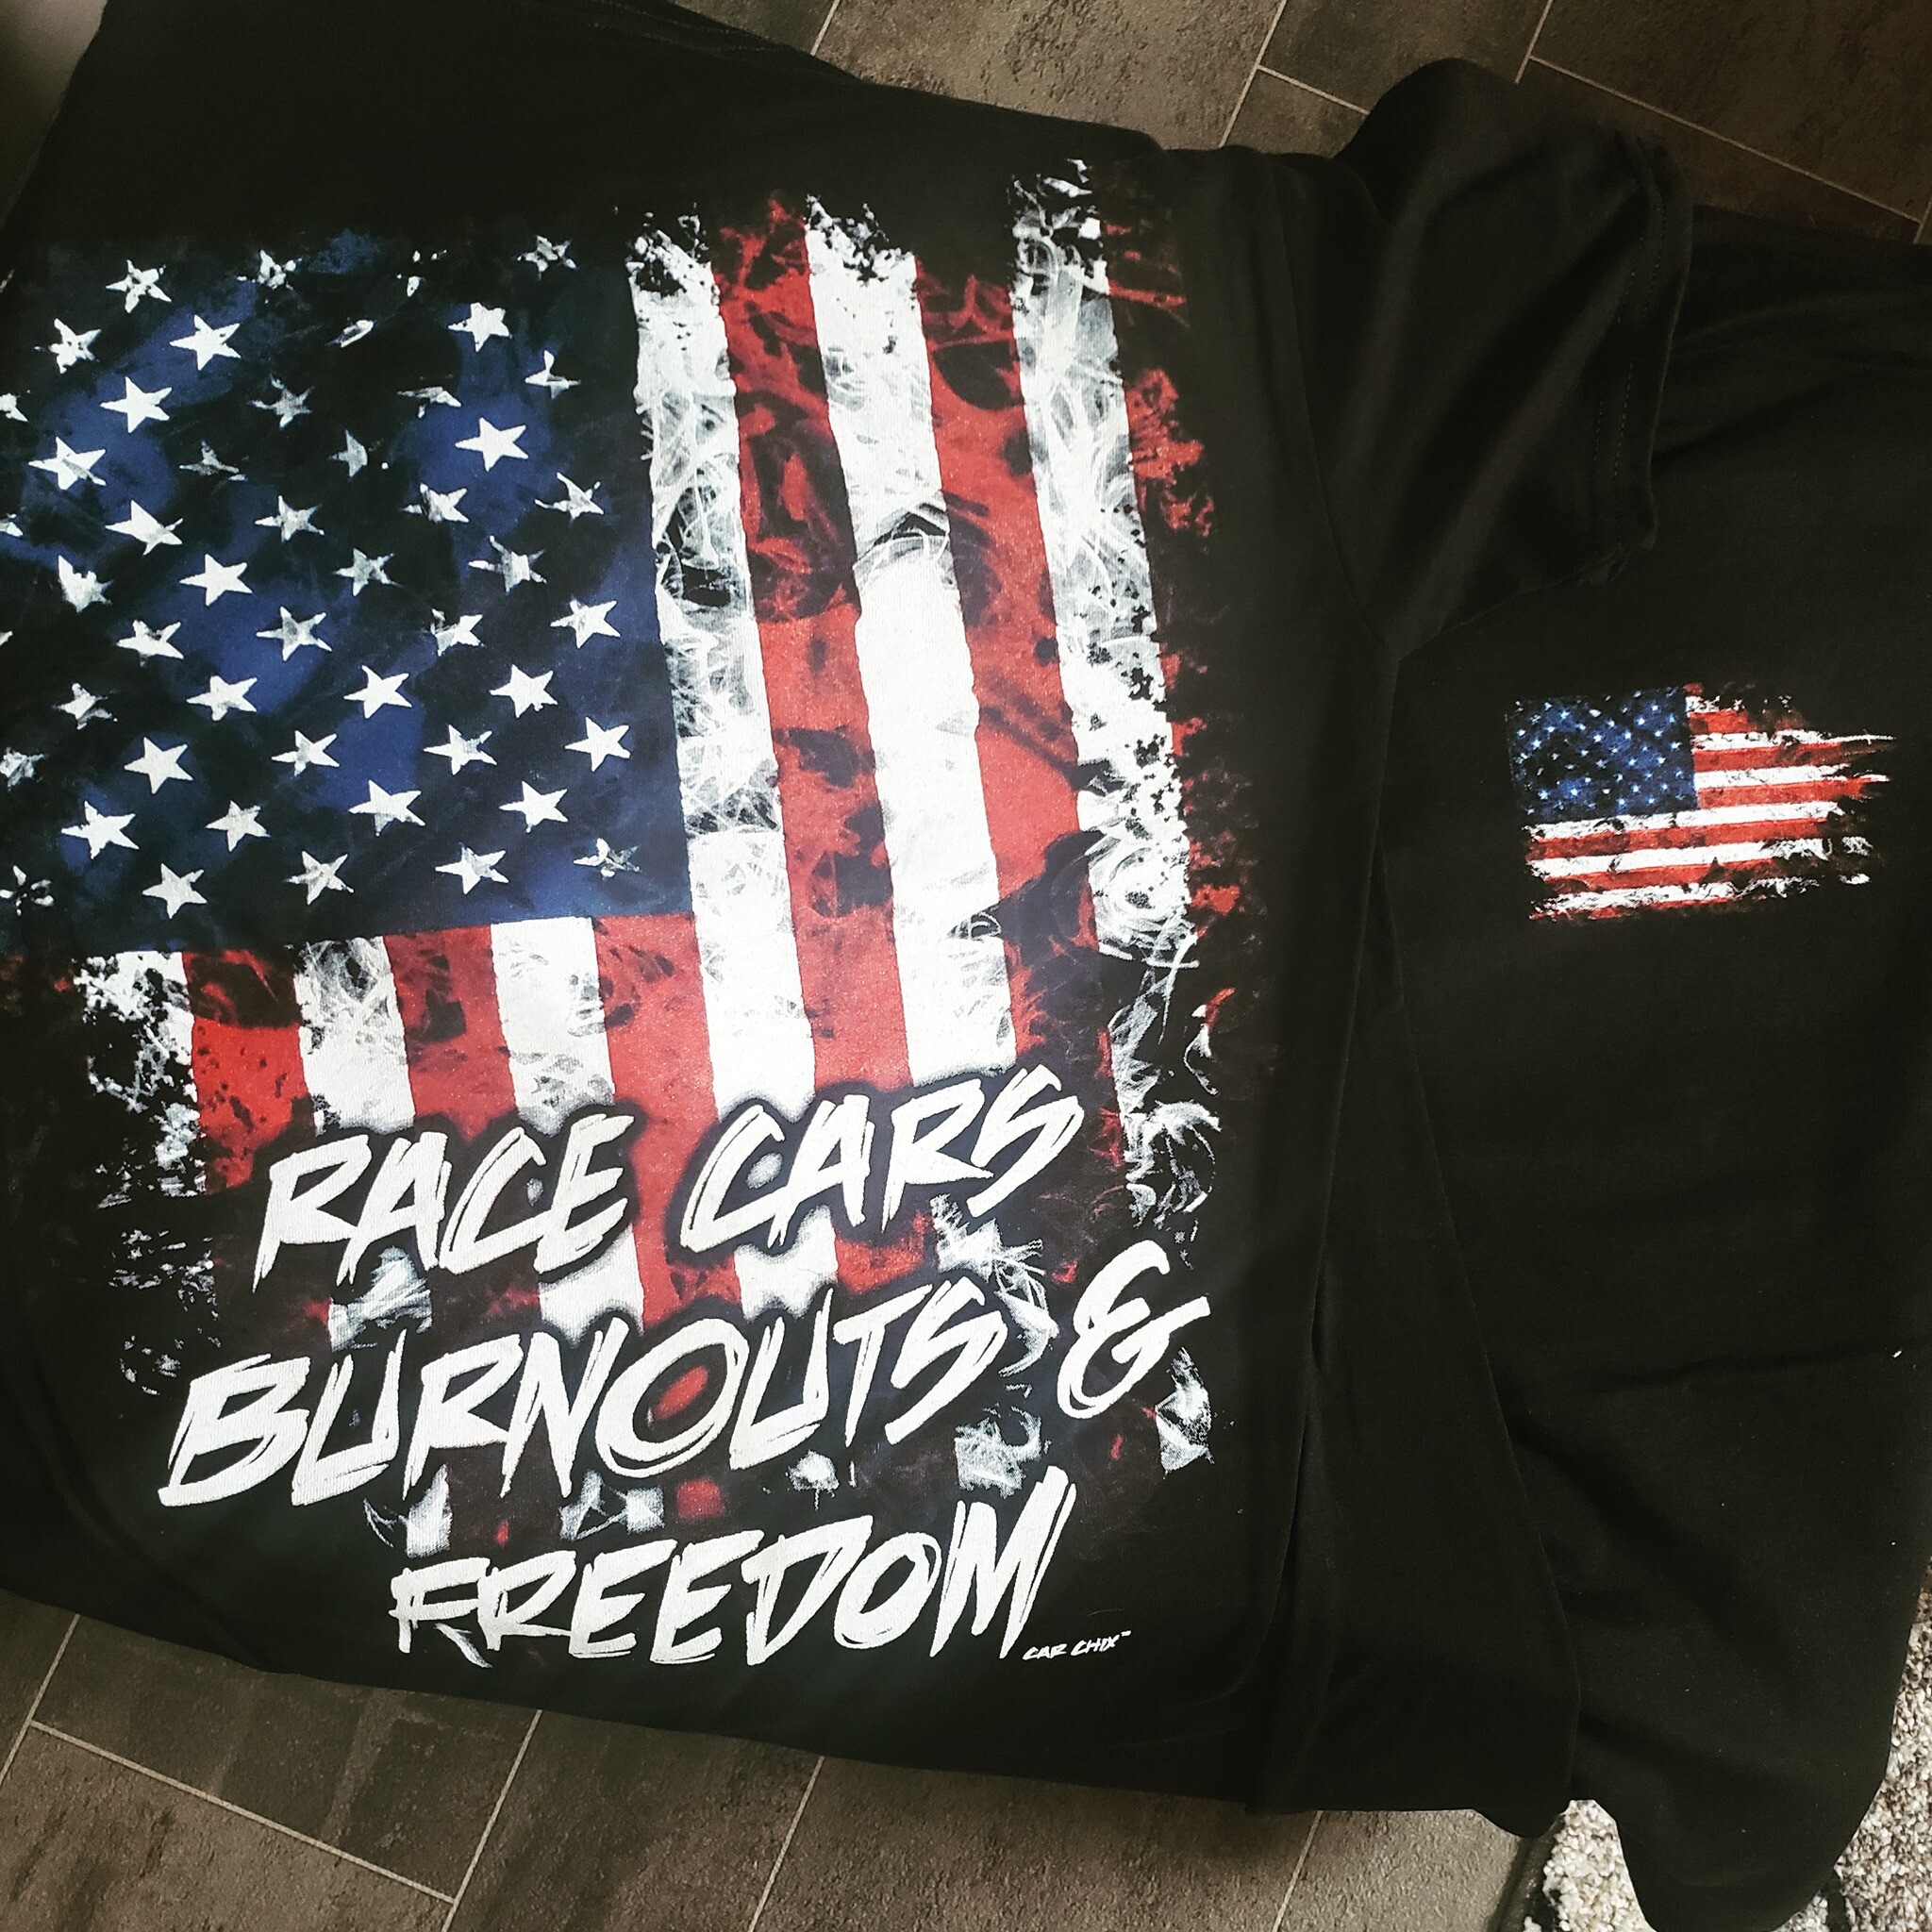 race cars burnsout and freedom-racecars-caring-burnsout-freedom-shirt-tshirt-shirts-clothing-carchix-carchicks-motorsports